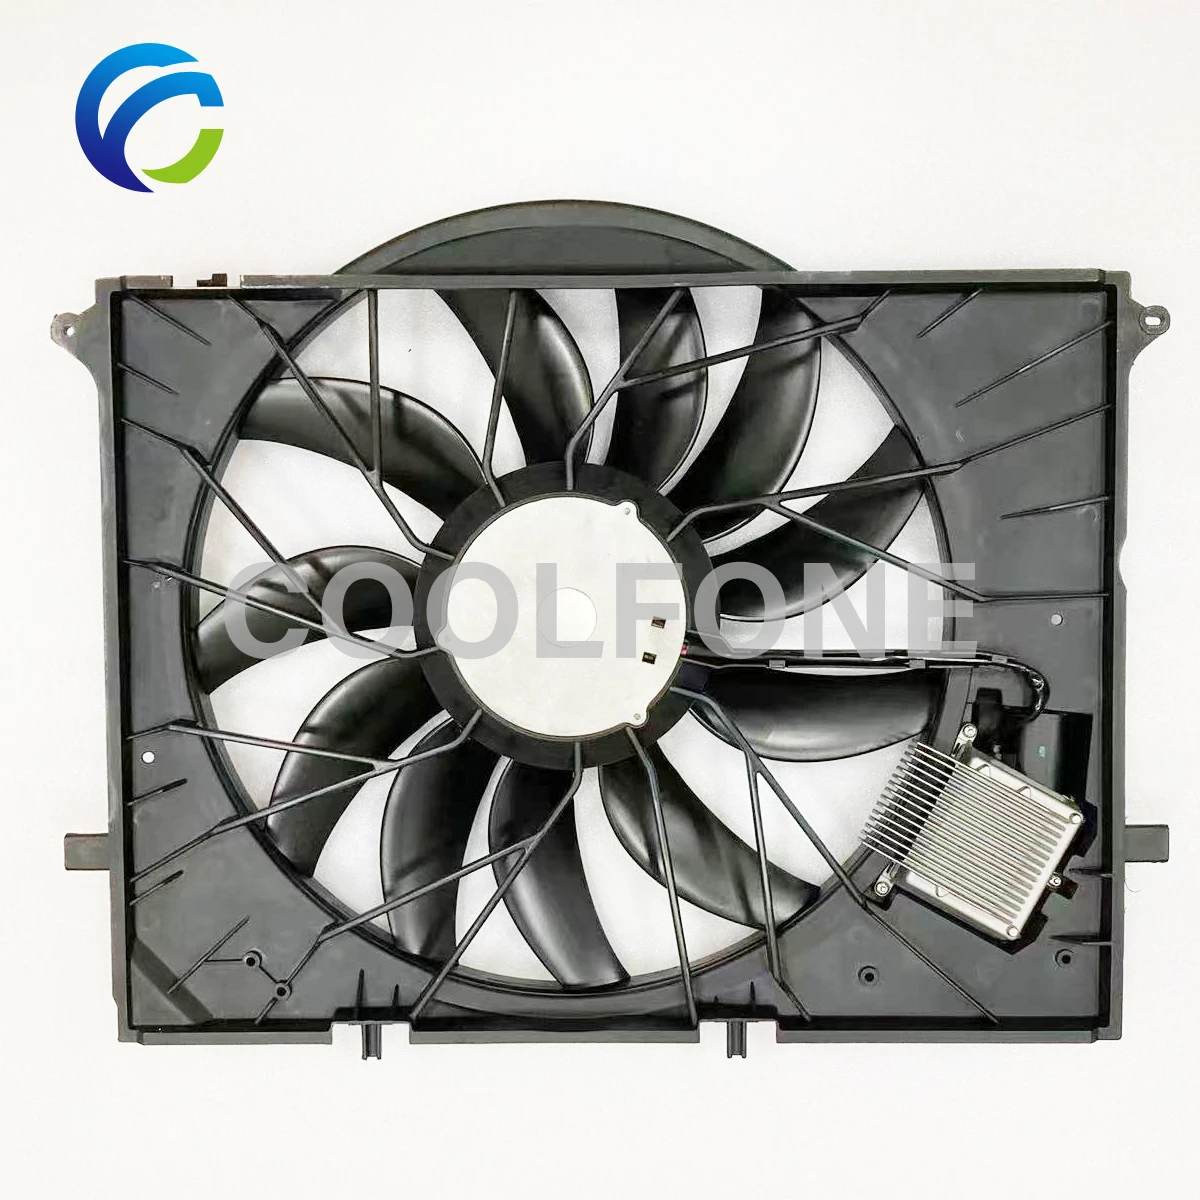 

Radiator Electric Fan for MERCEDES BENZ S-CLASS W220 S600 S350 S550 S430 S320 S500 S280 S400 S65 A2205000293 850W